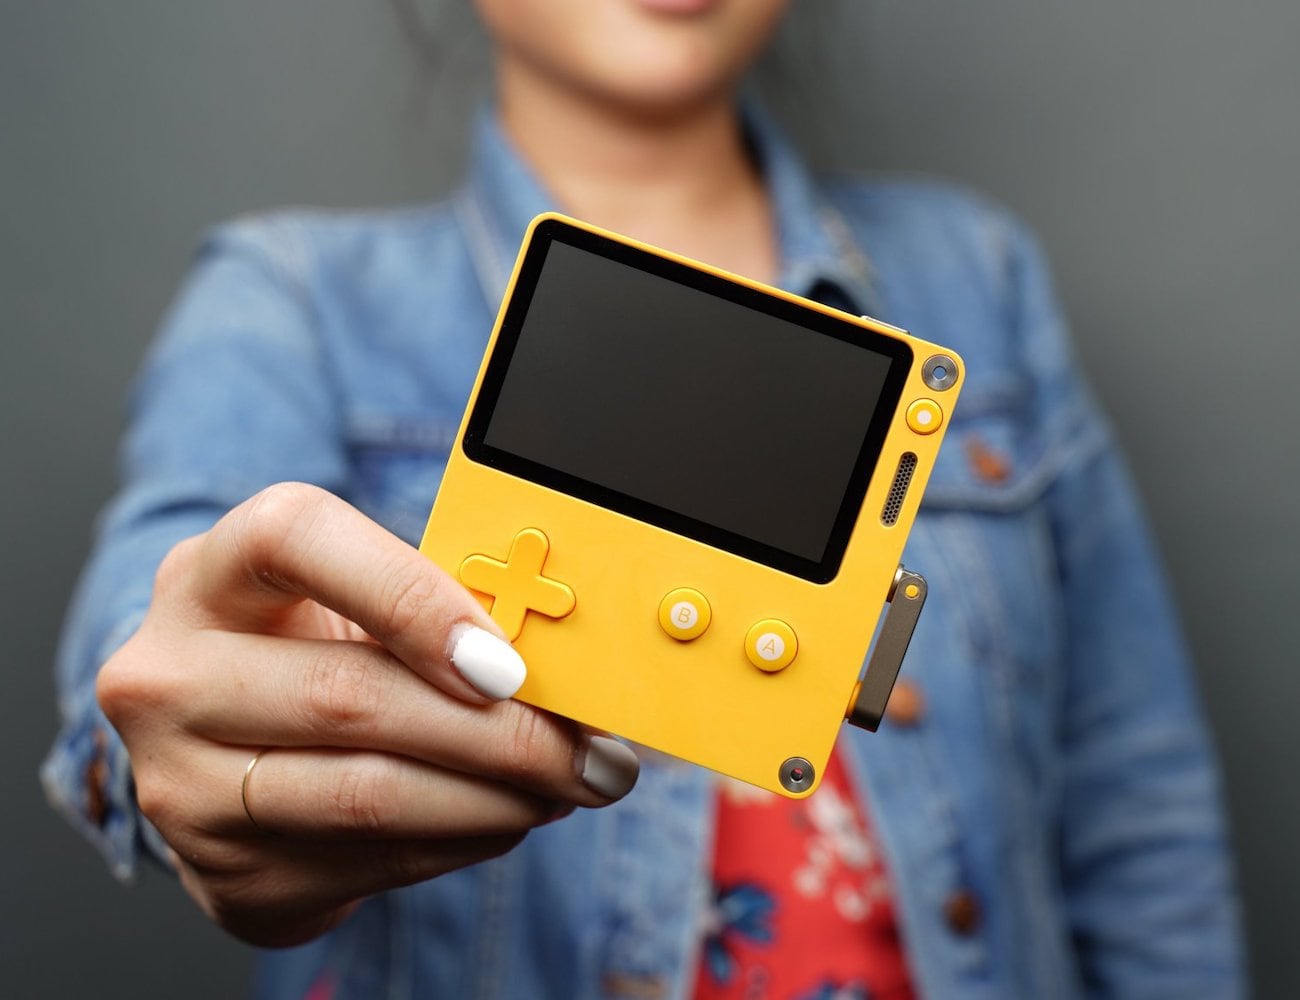 Playdate Handheld Gaming System comes with 12 unique video games